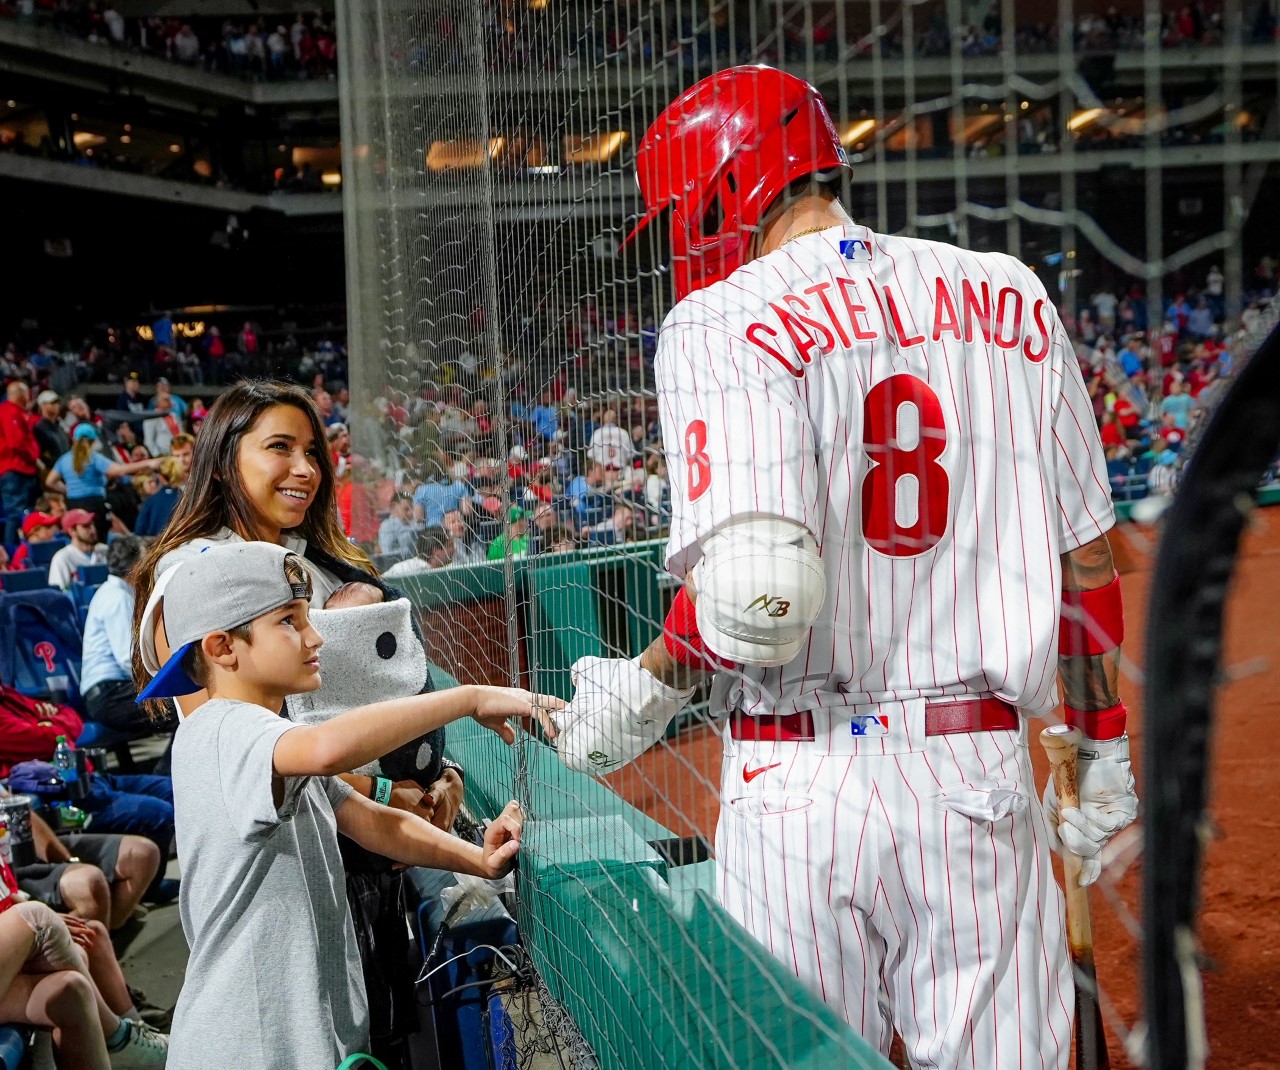 Who this Phils star hangs out with on deck